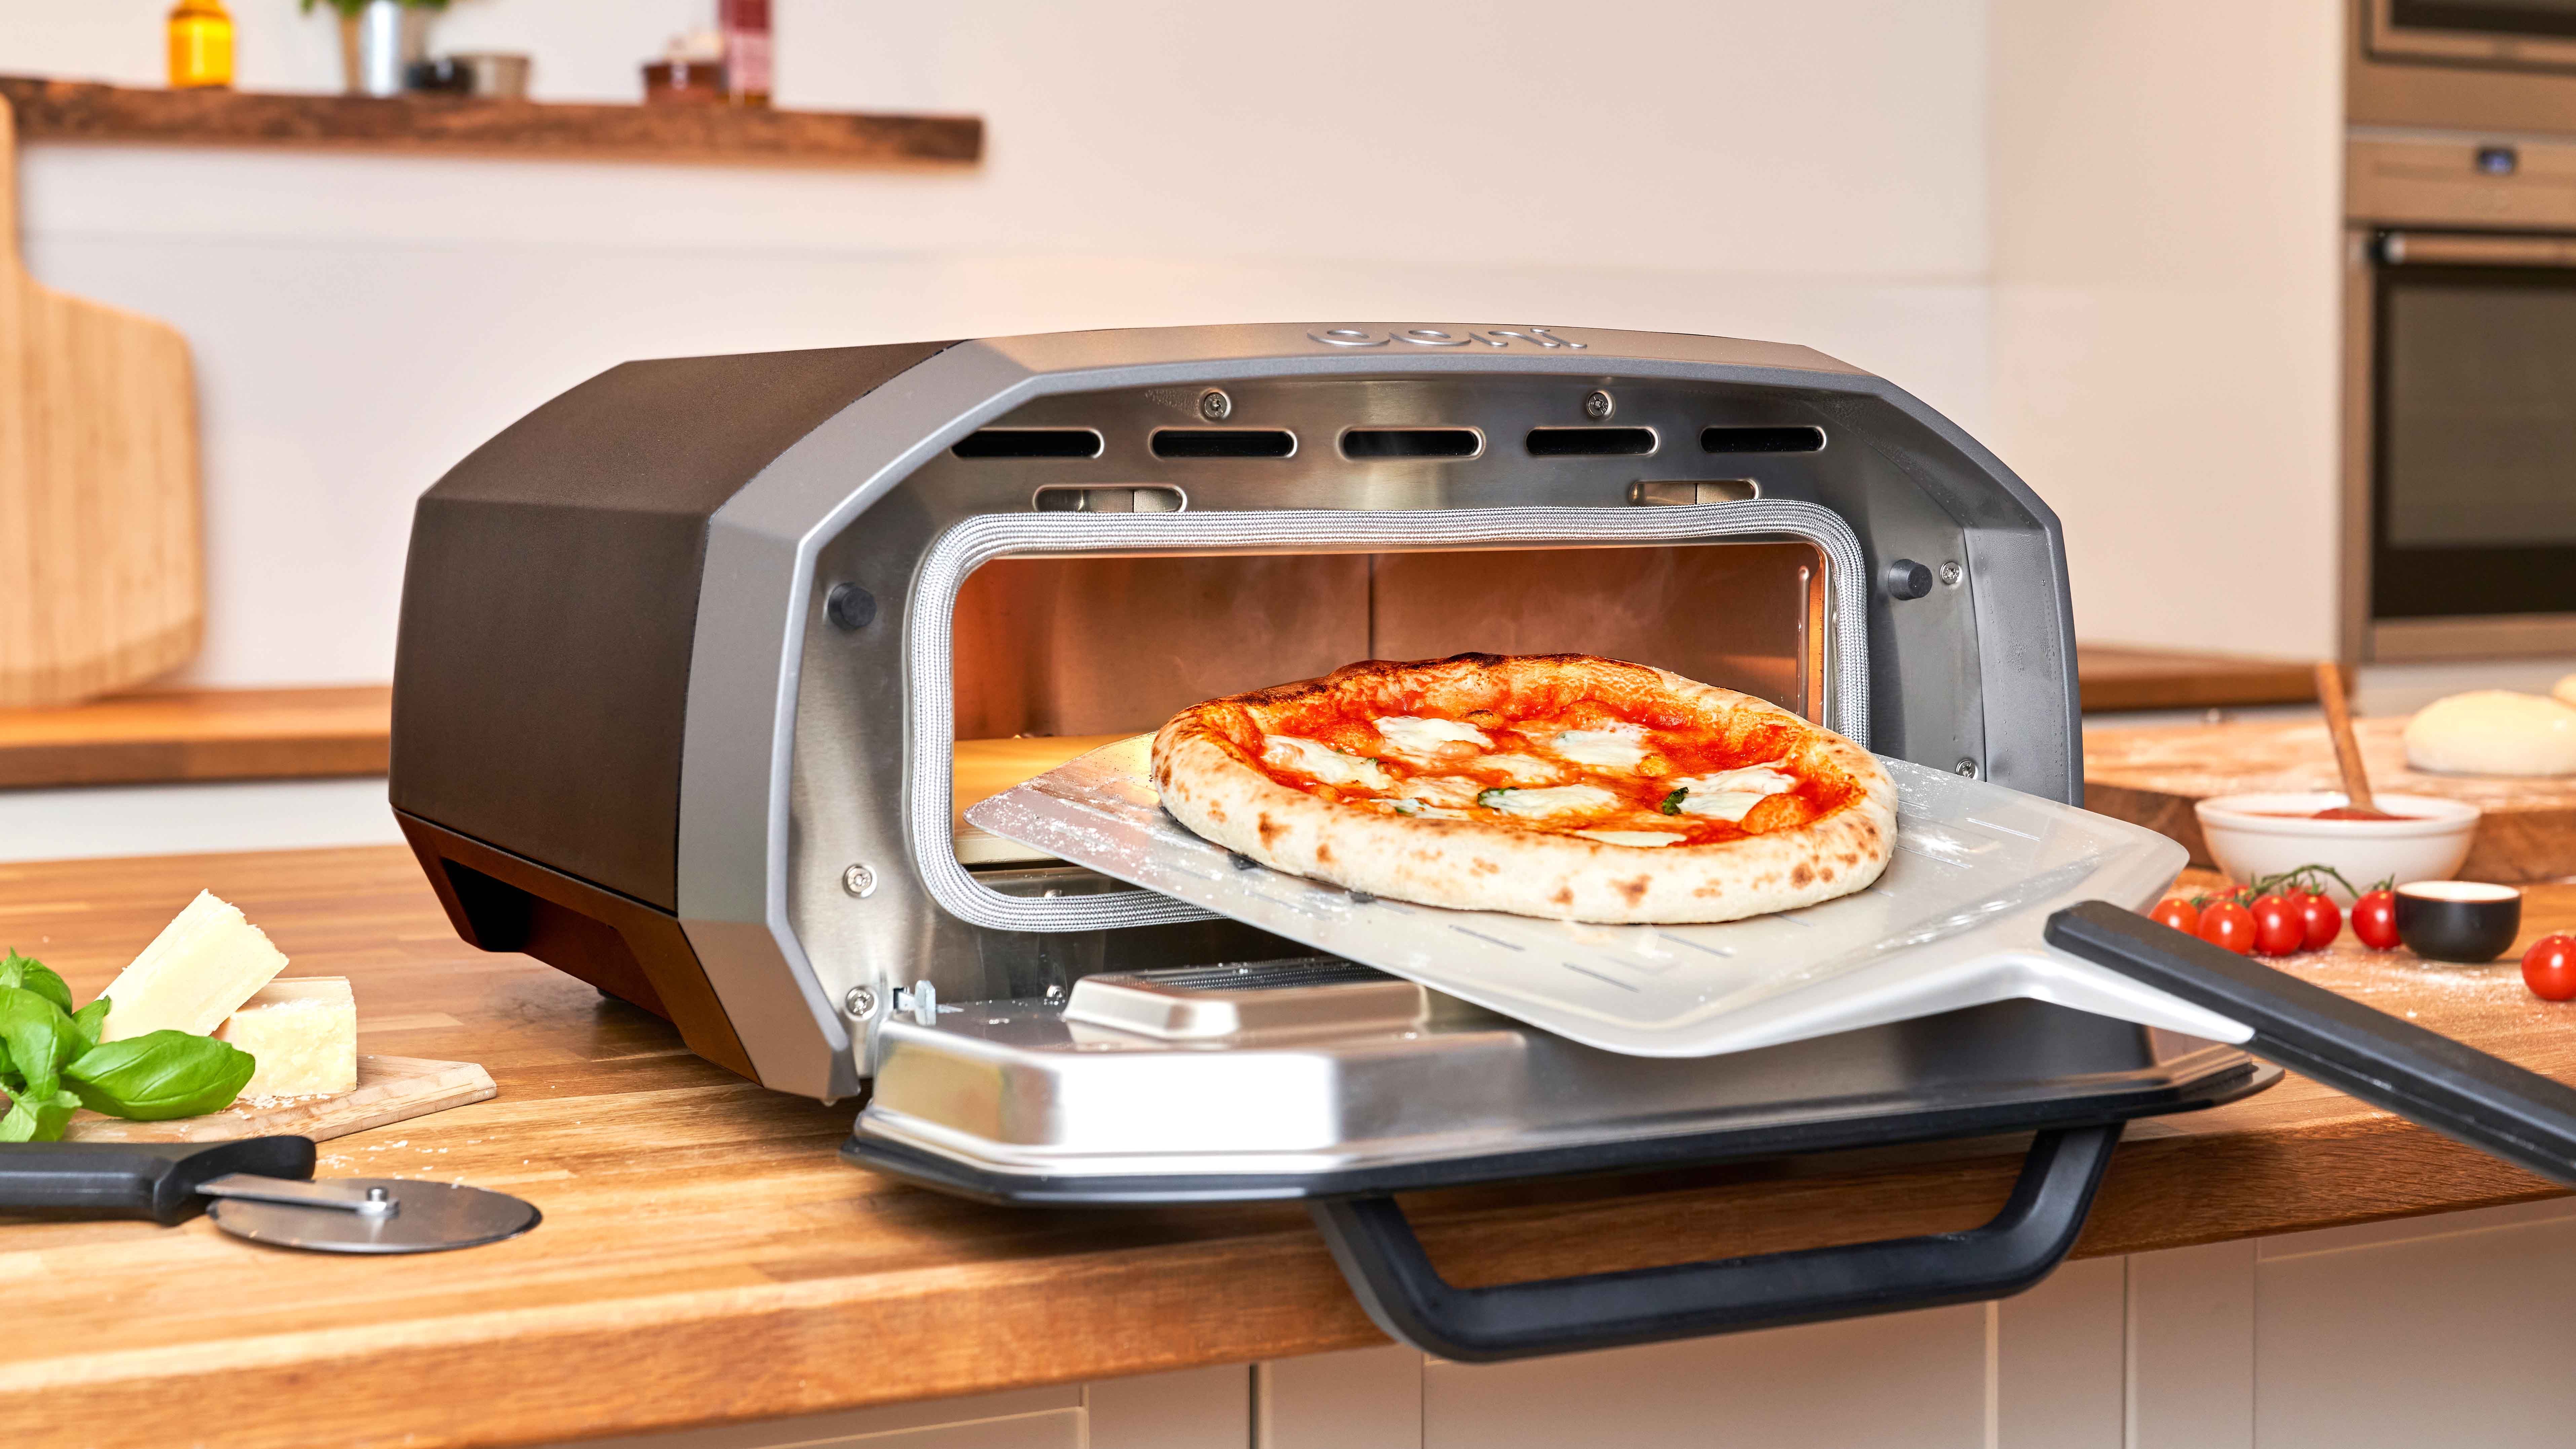 Pizza Storage & Safety: How Long Can It Really Stay Out?